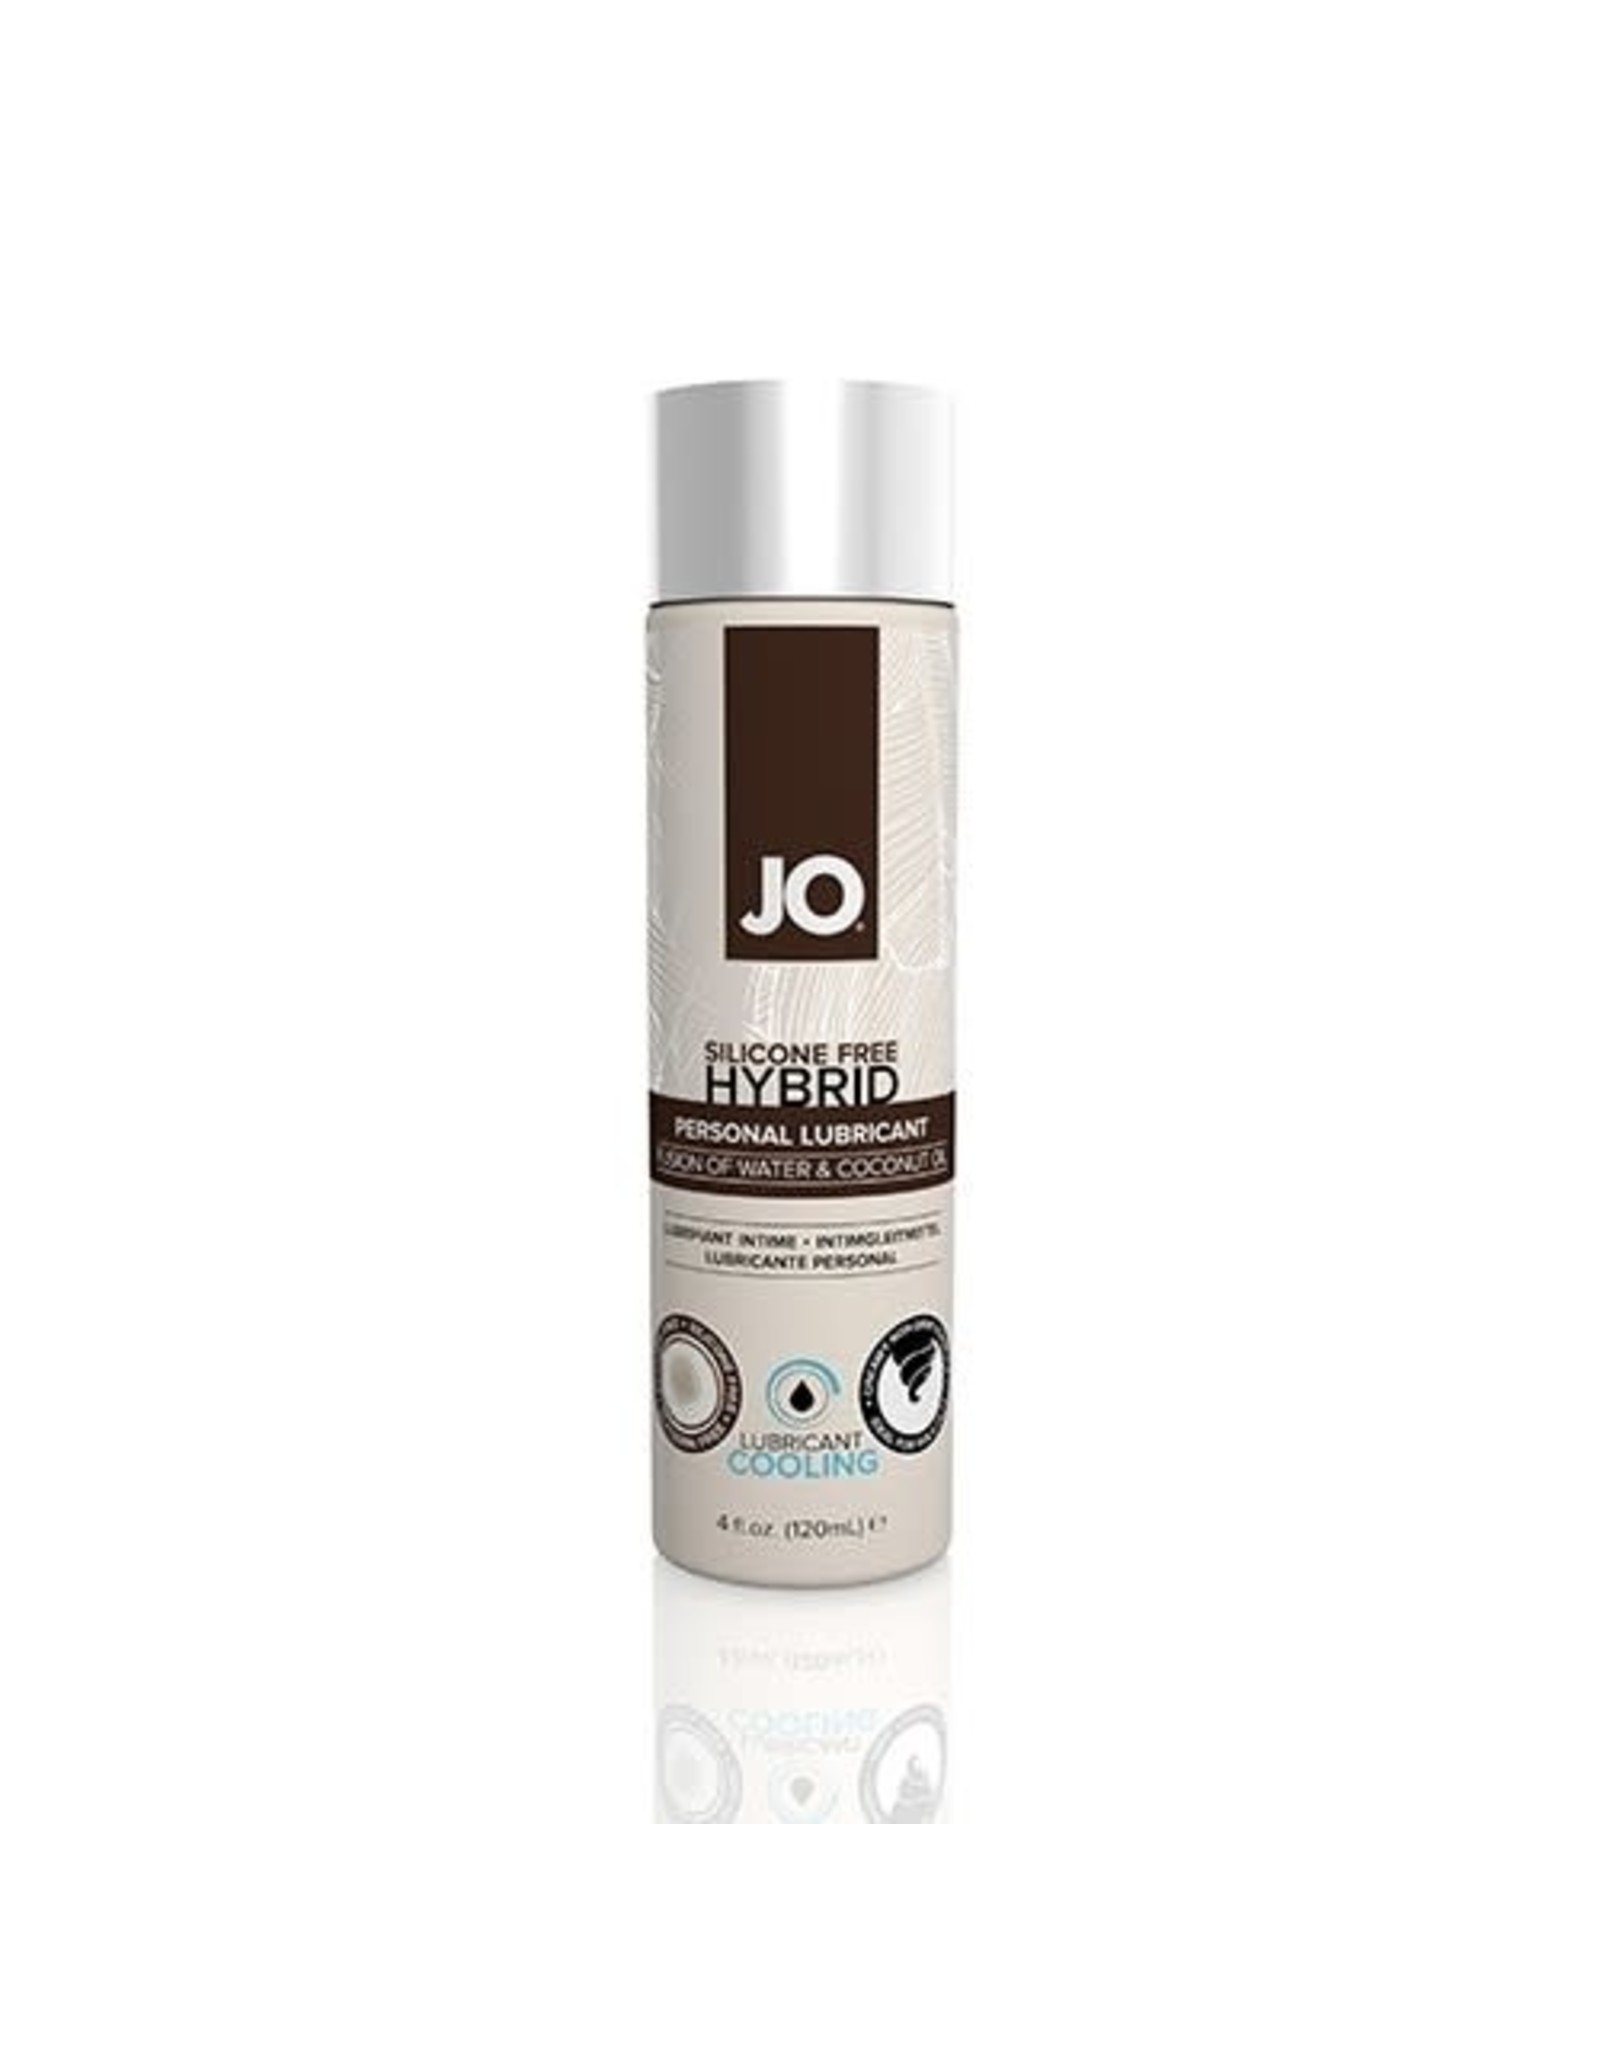 SYSTEM JO JO - SILICONE FREE HYBRID COOLING LUBRICANT - 4OZ/120ML